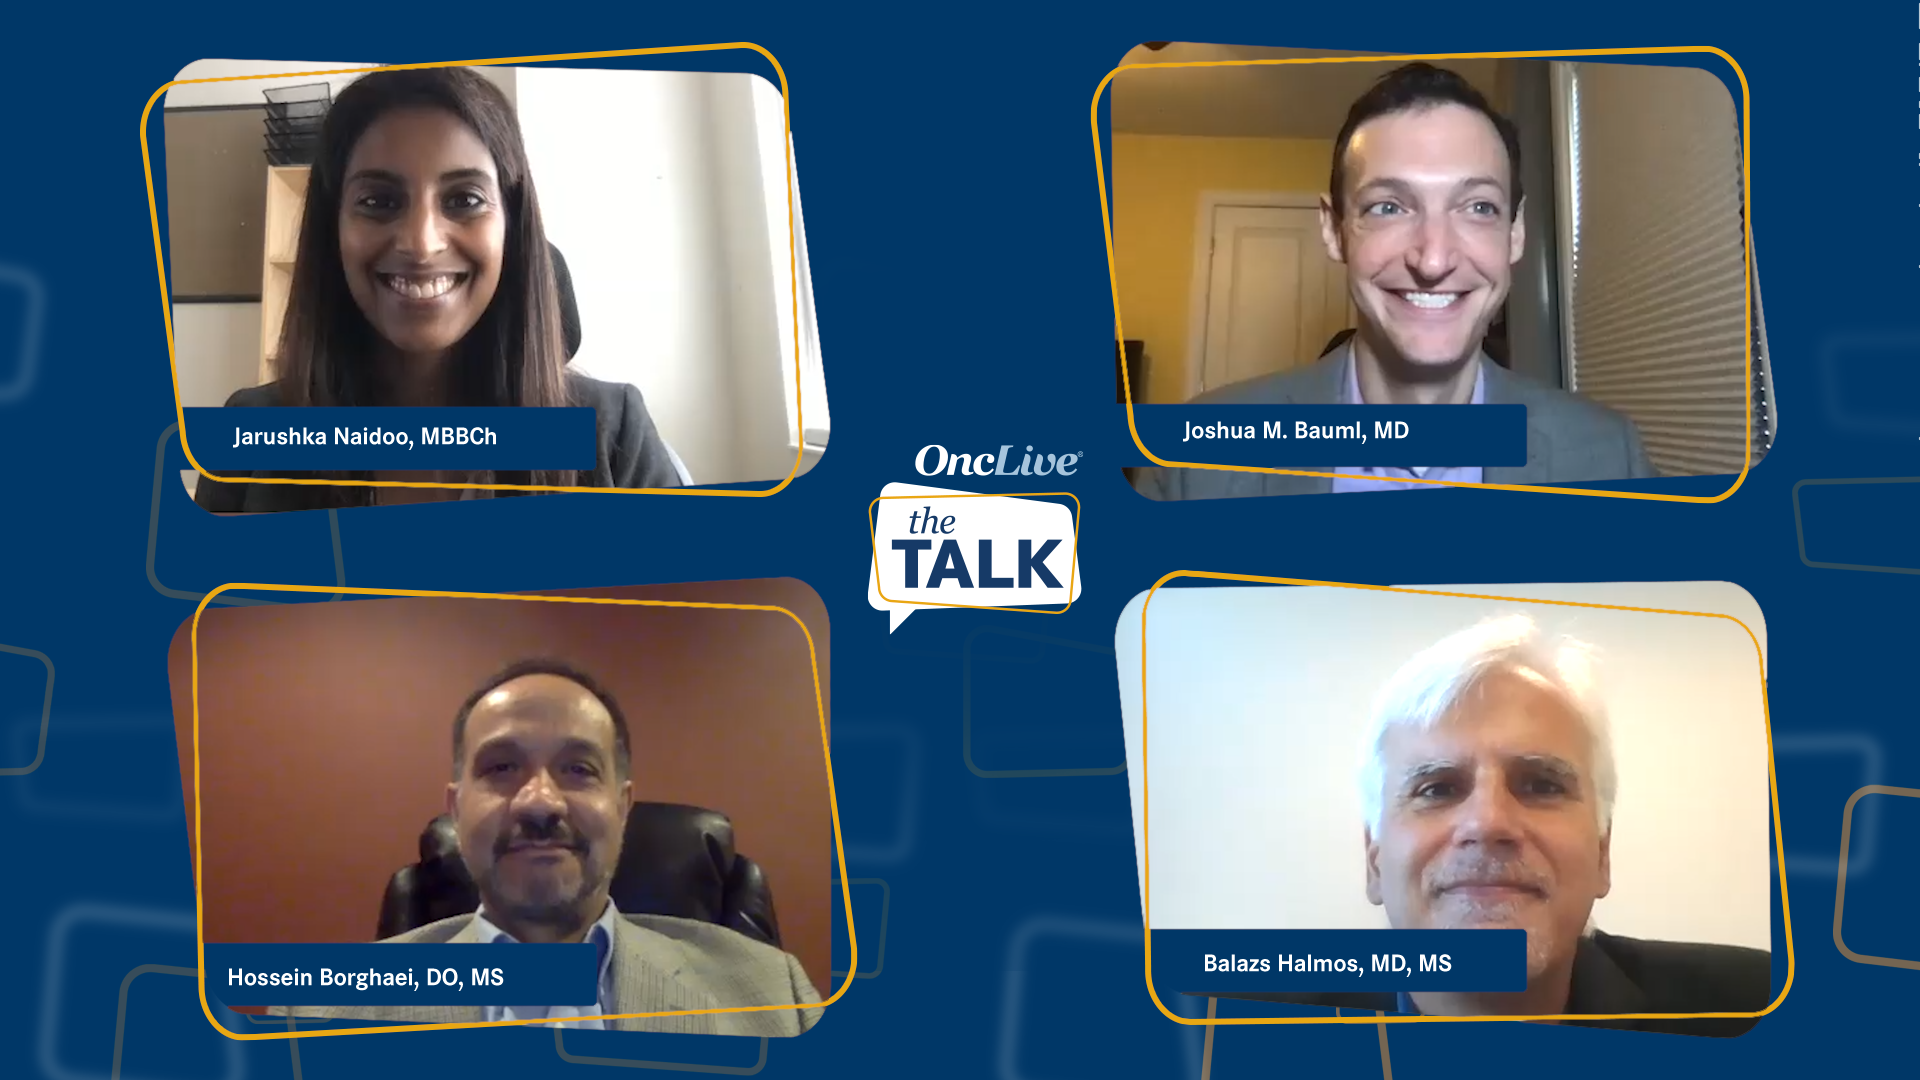 “Lung Cancer Talk”: A Review of Data from the ASCO 2020 Virtual Meeting